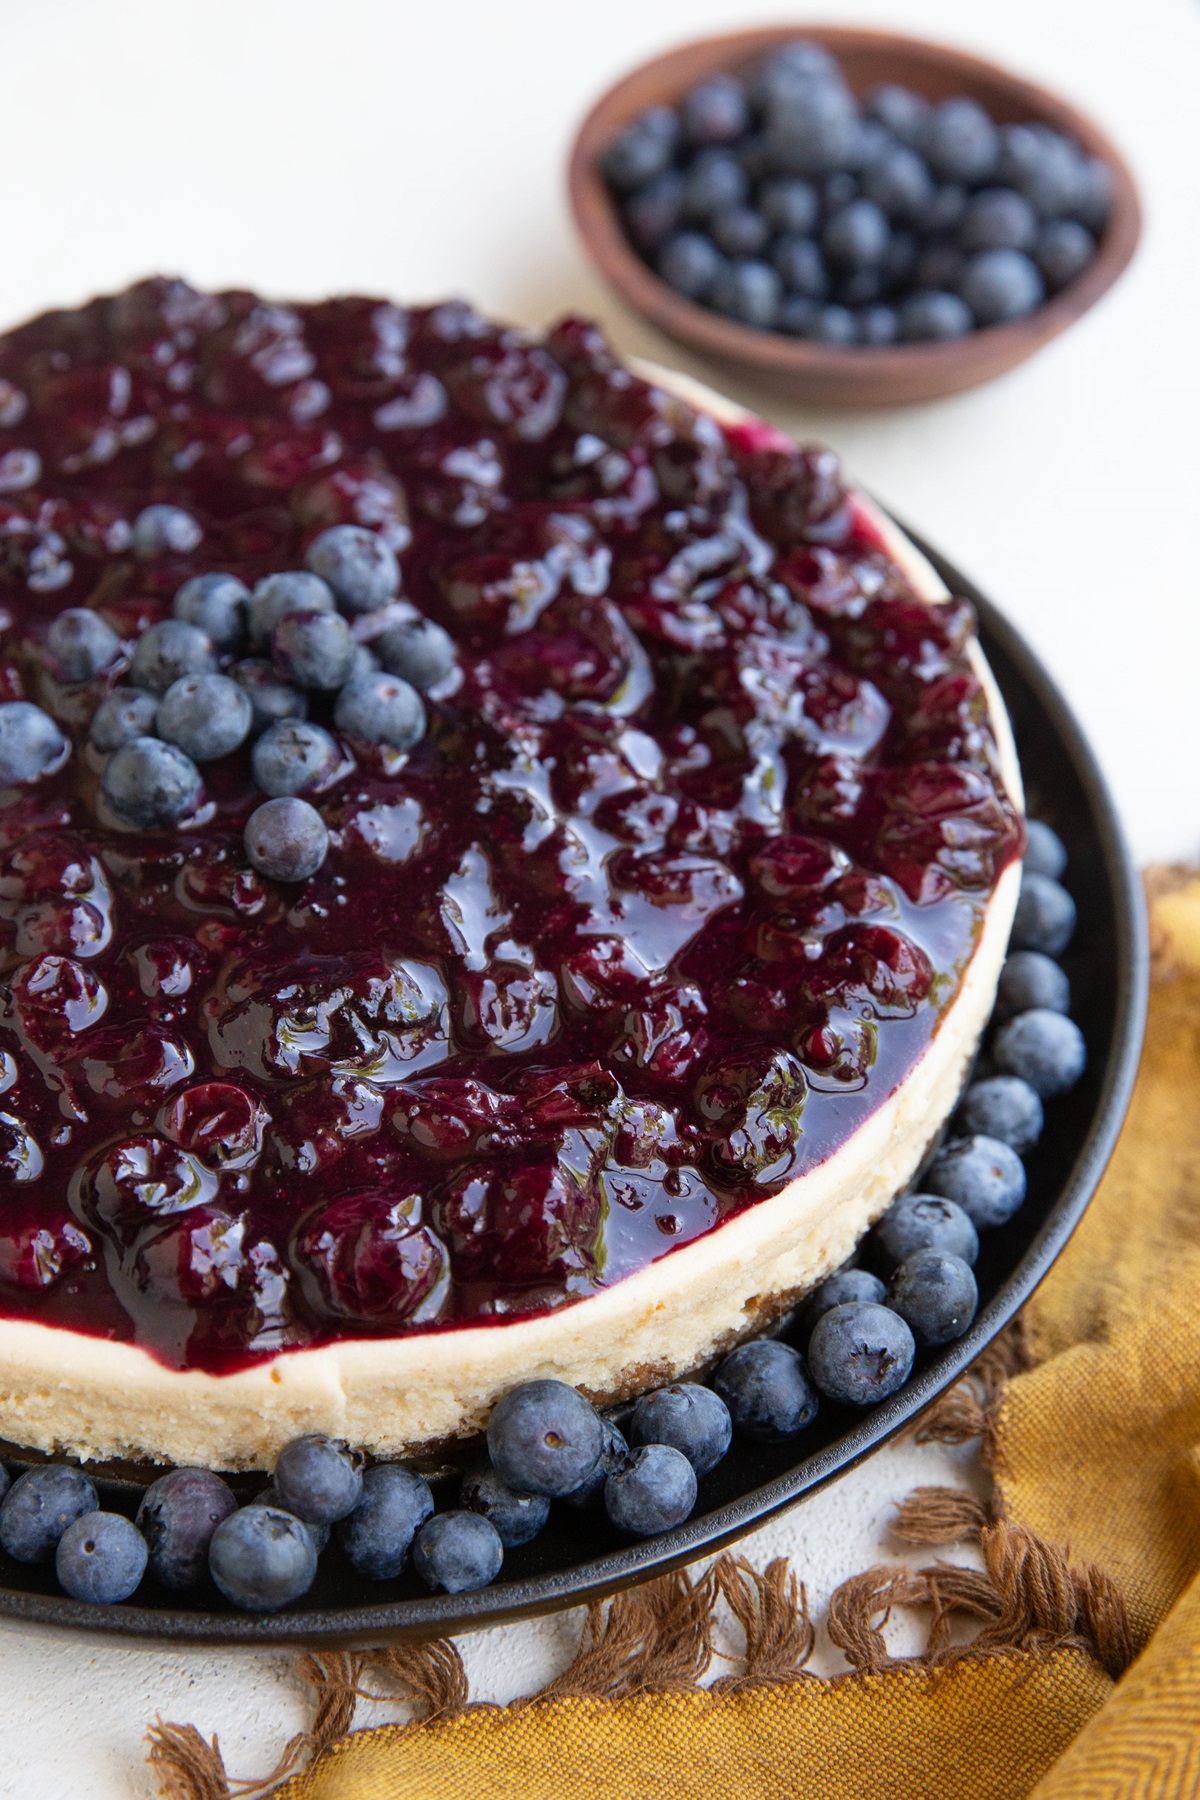 Whole cheesecake with blueberry topping and a bowl of fresh blueberries in the background, ready to serve.